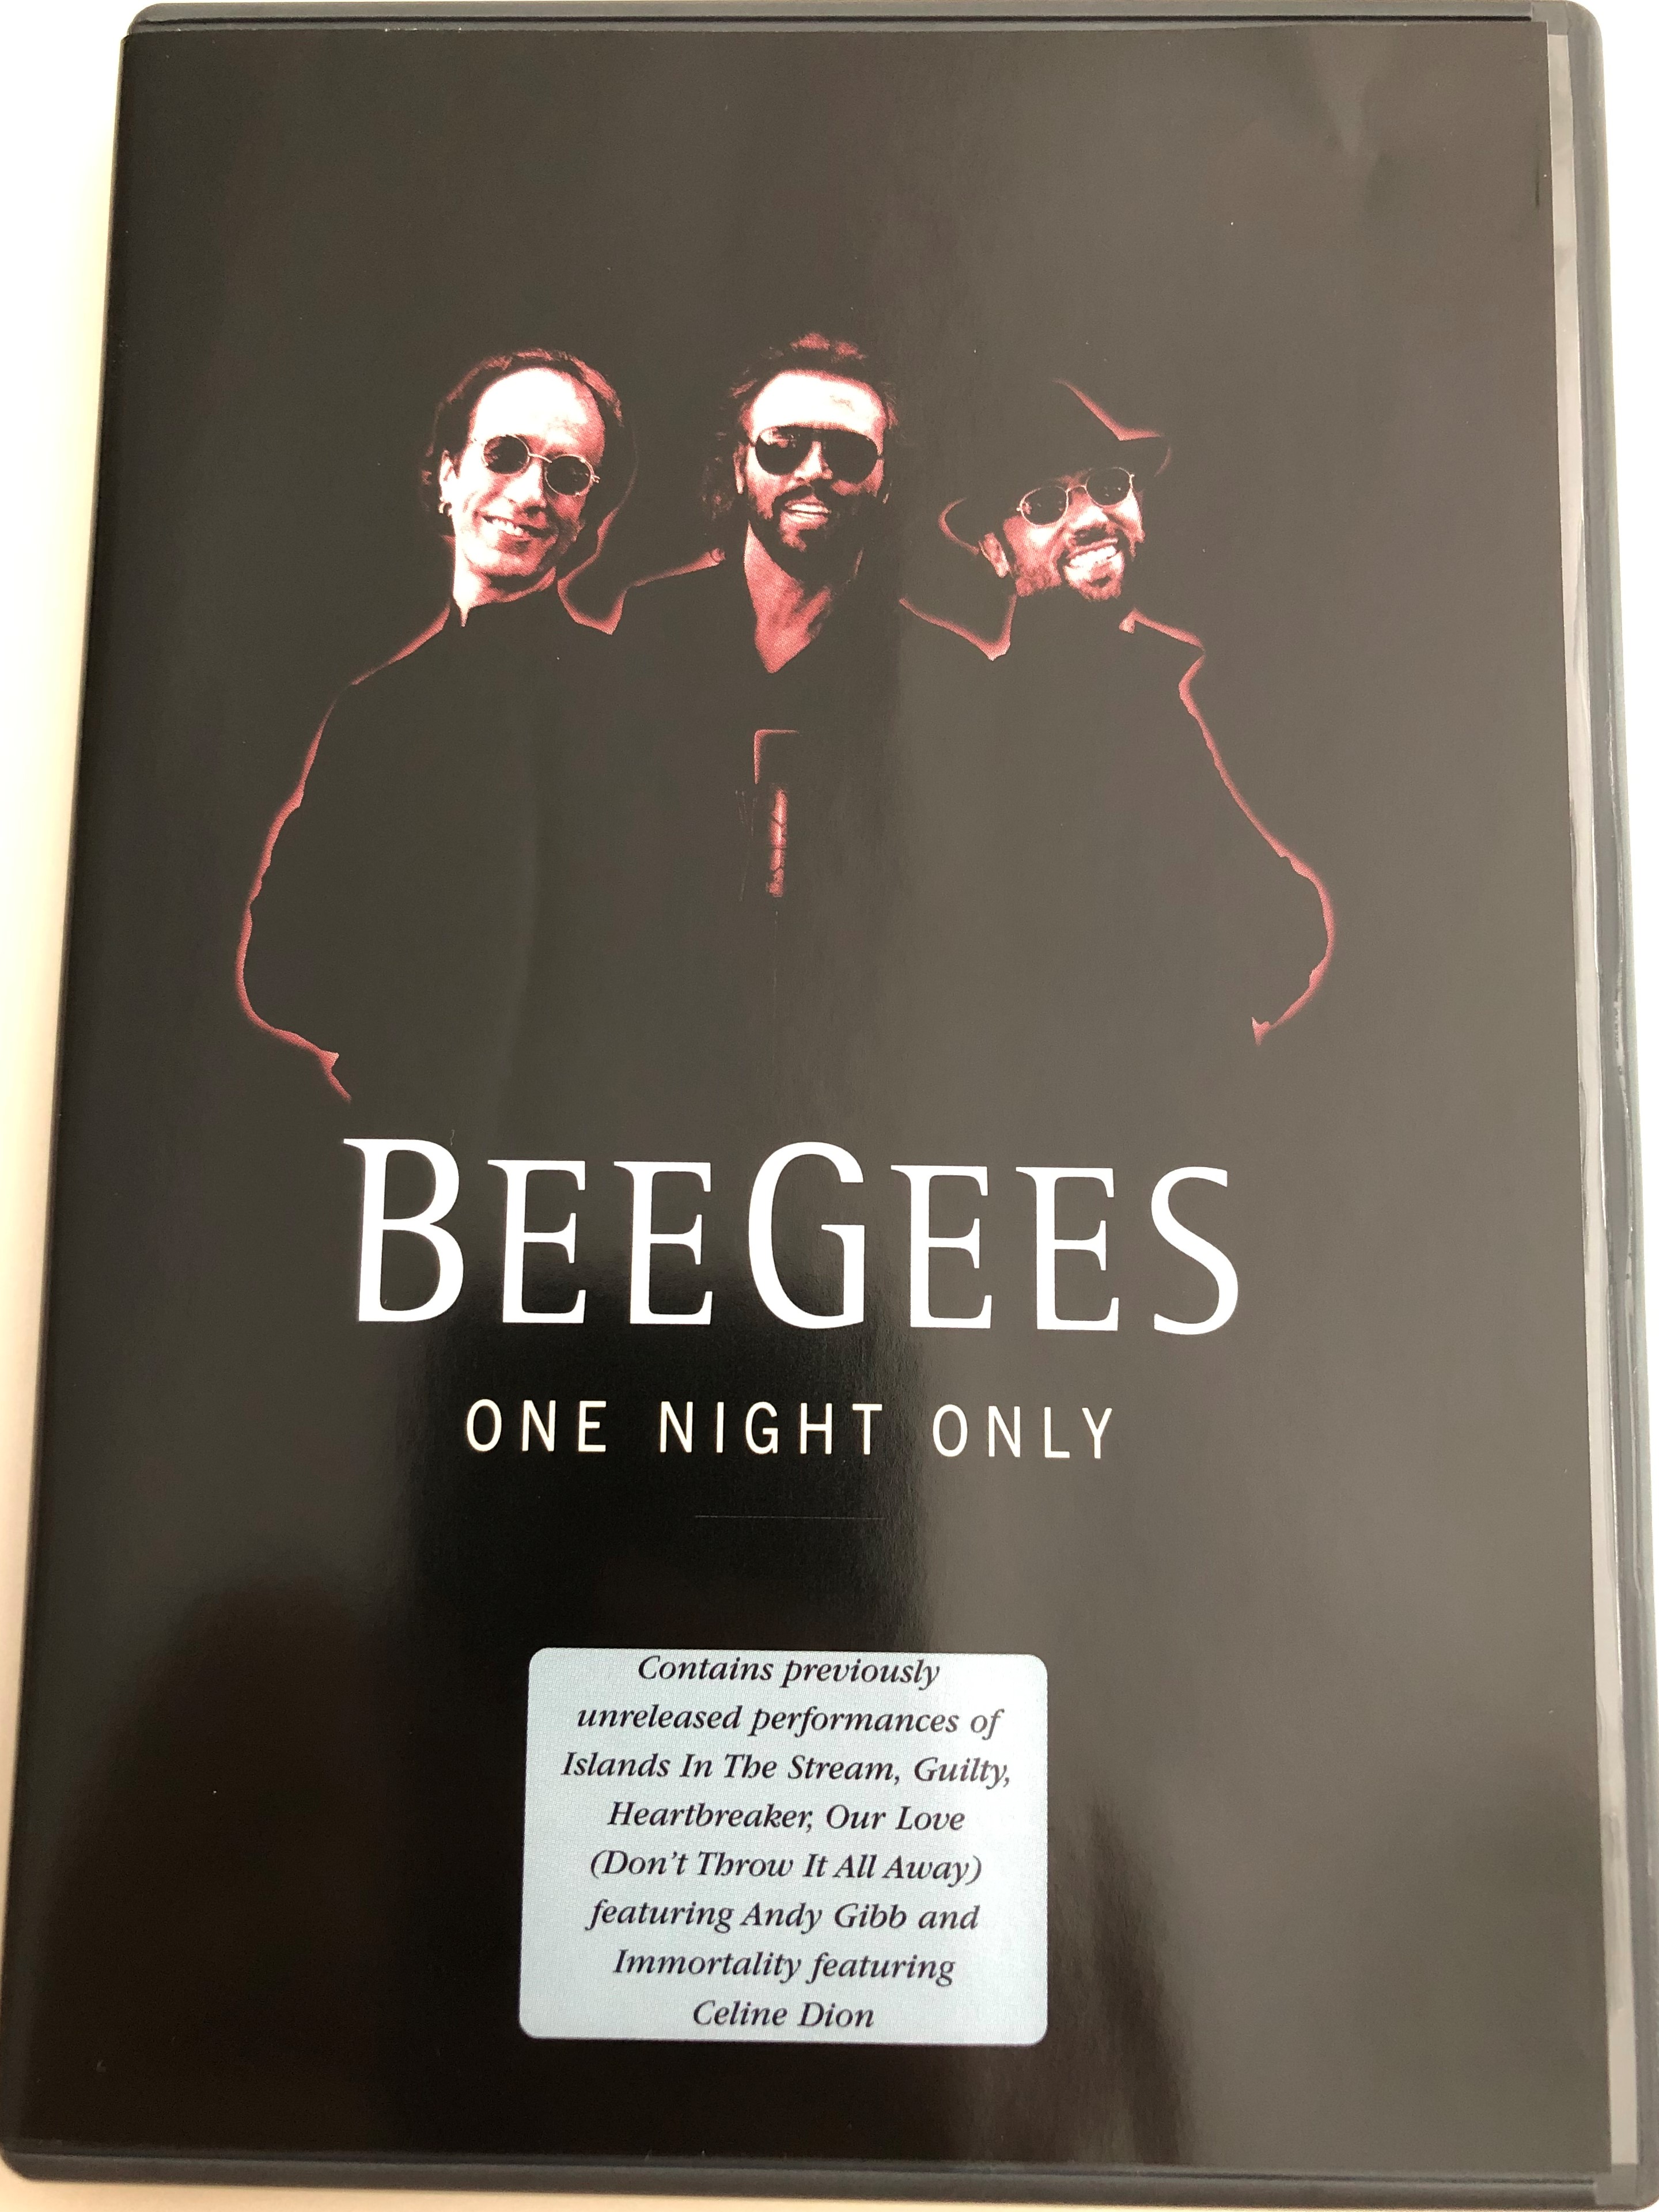 bee-gees-one-night-only-dvd-contains-previously-unreleased-performances-of-islands-in-the-sream-guilty-heartbreaker-ft.-andy-gibb-immortality-ft.-celine-dion-1-.jpg